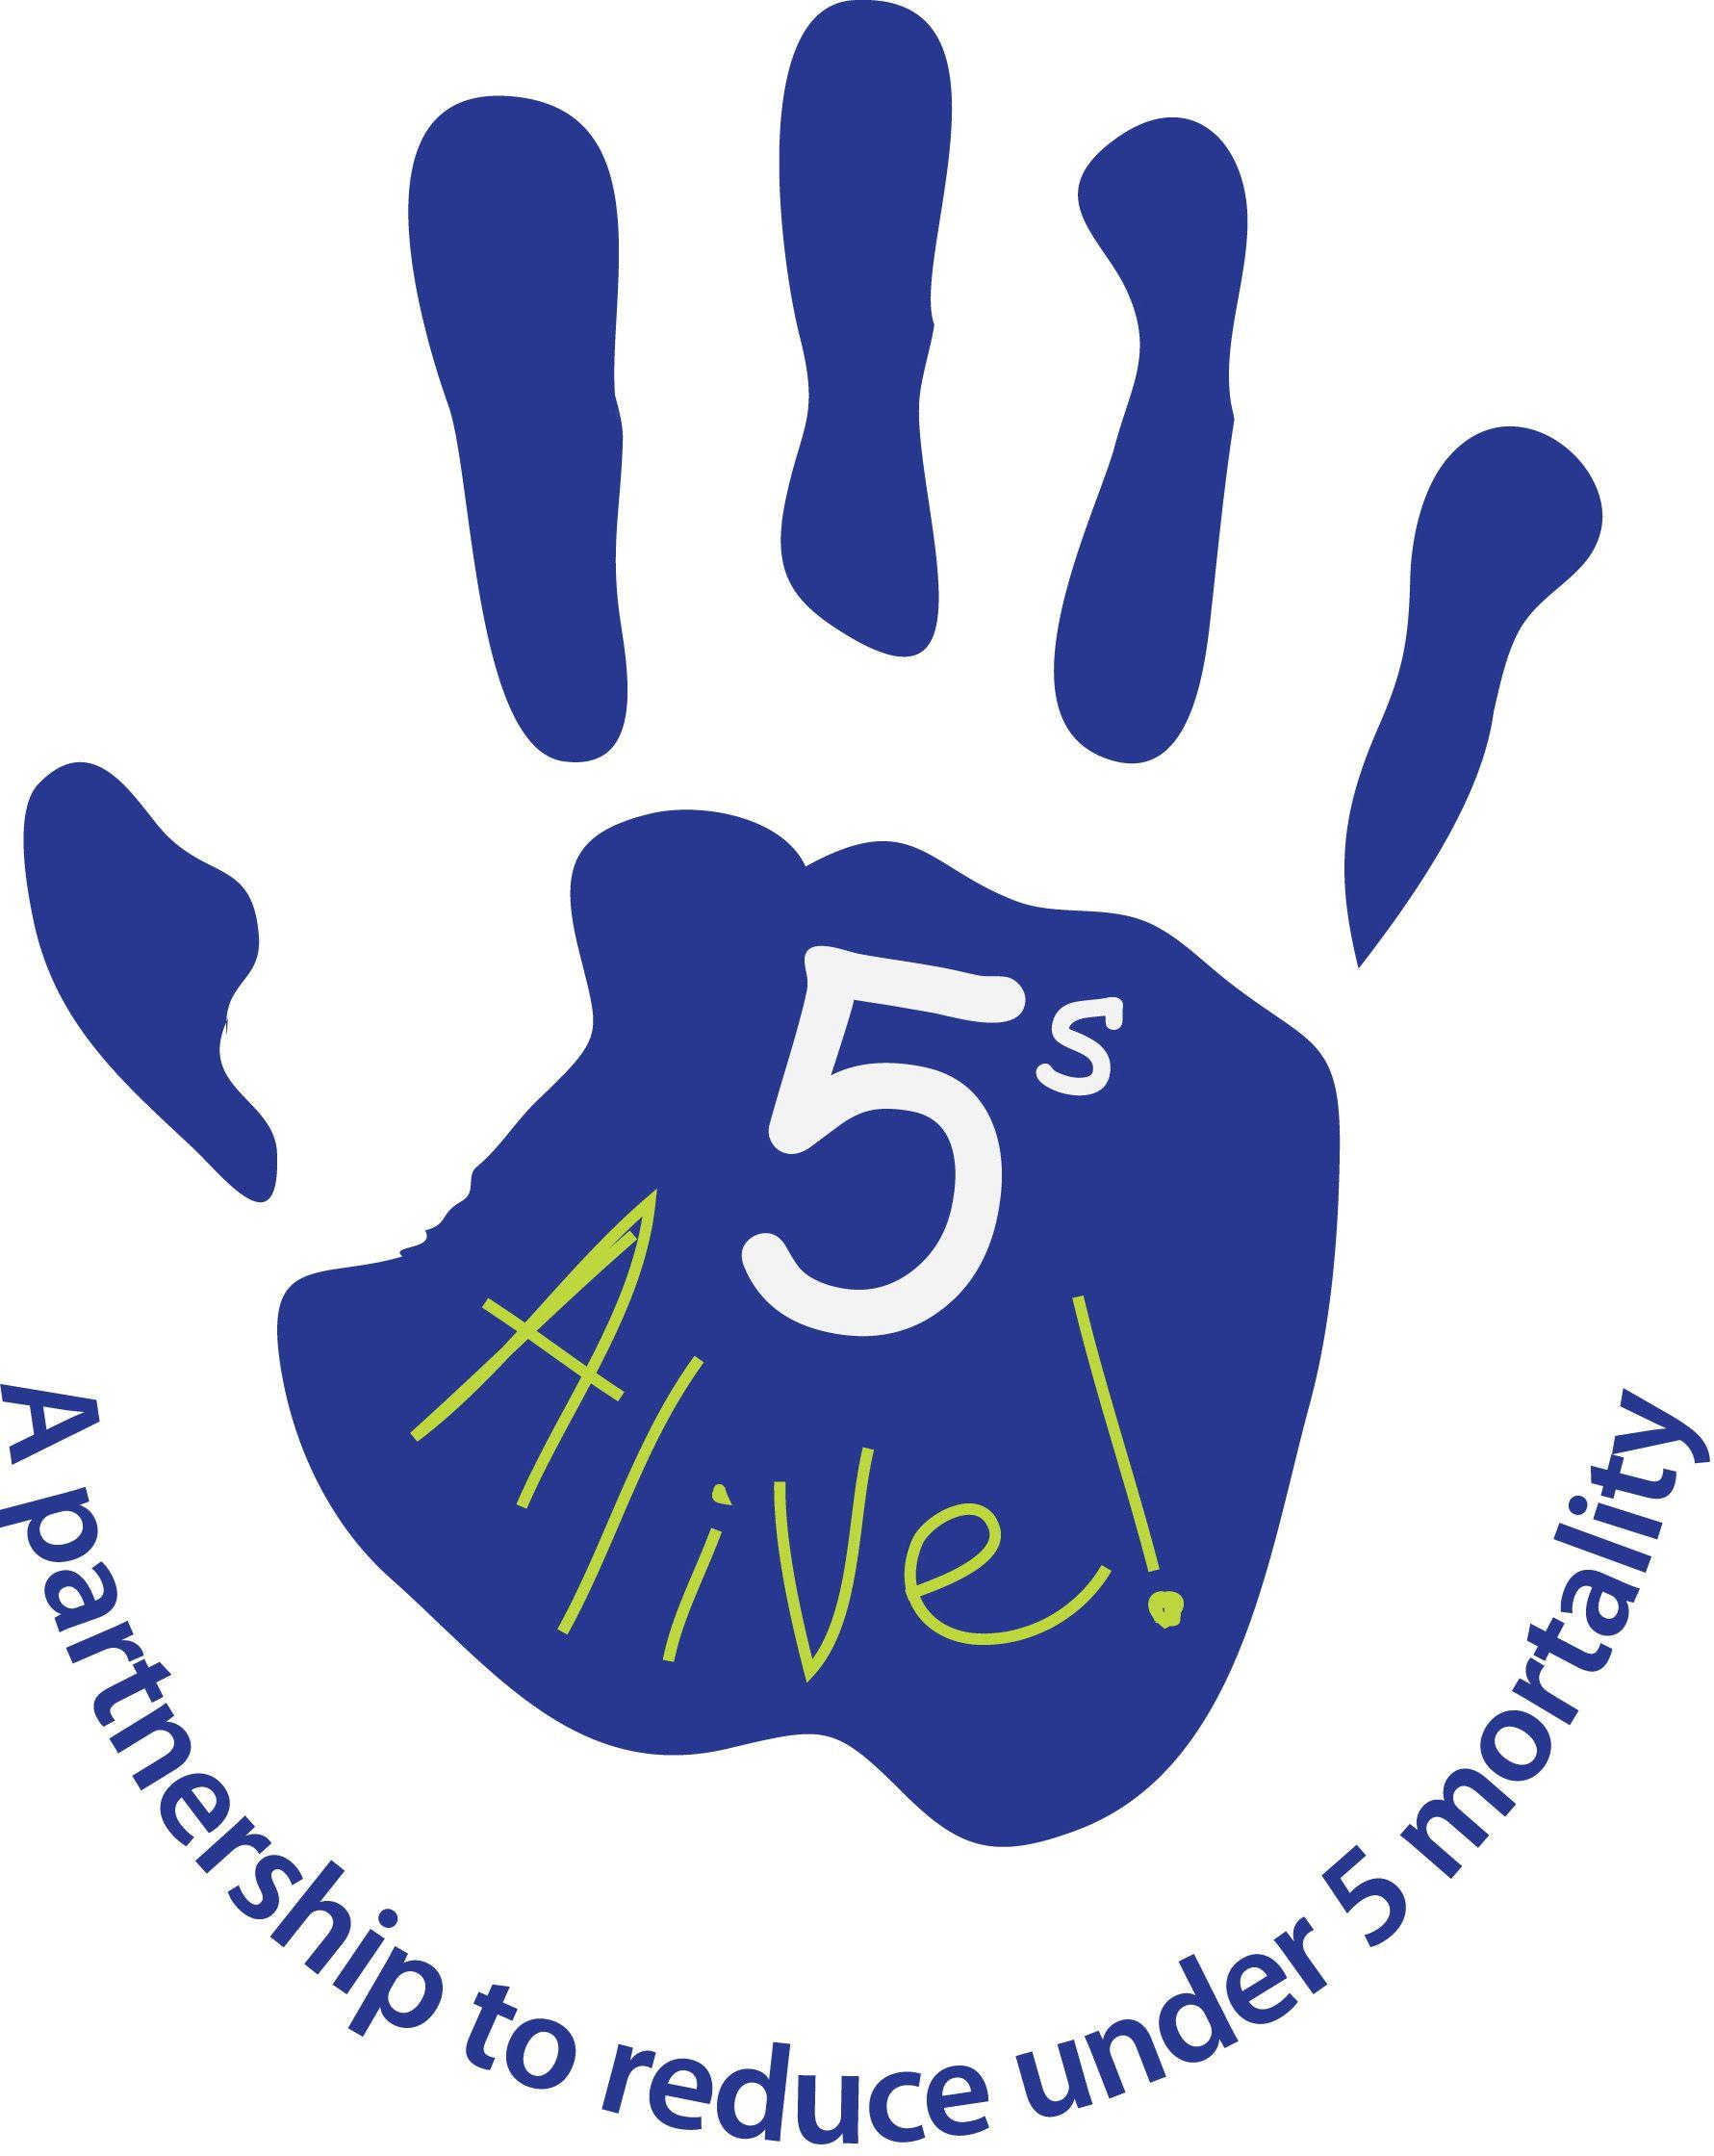 Five S Logo - Institute for Healthcare Improvement: Project Fives Alive! in Ghana